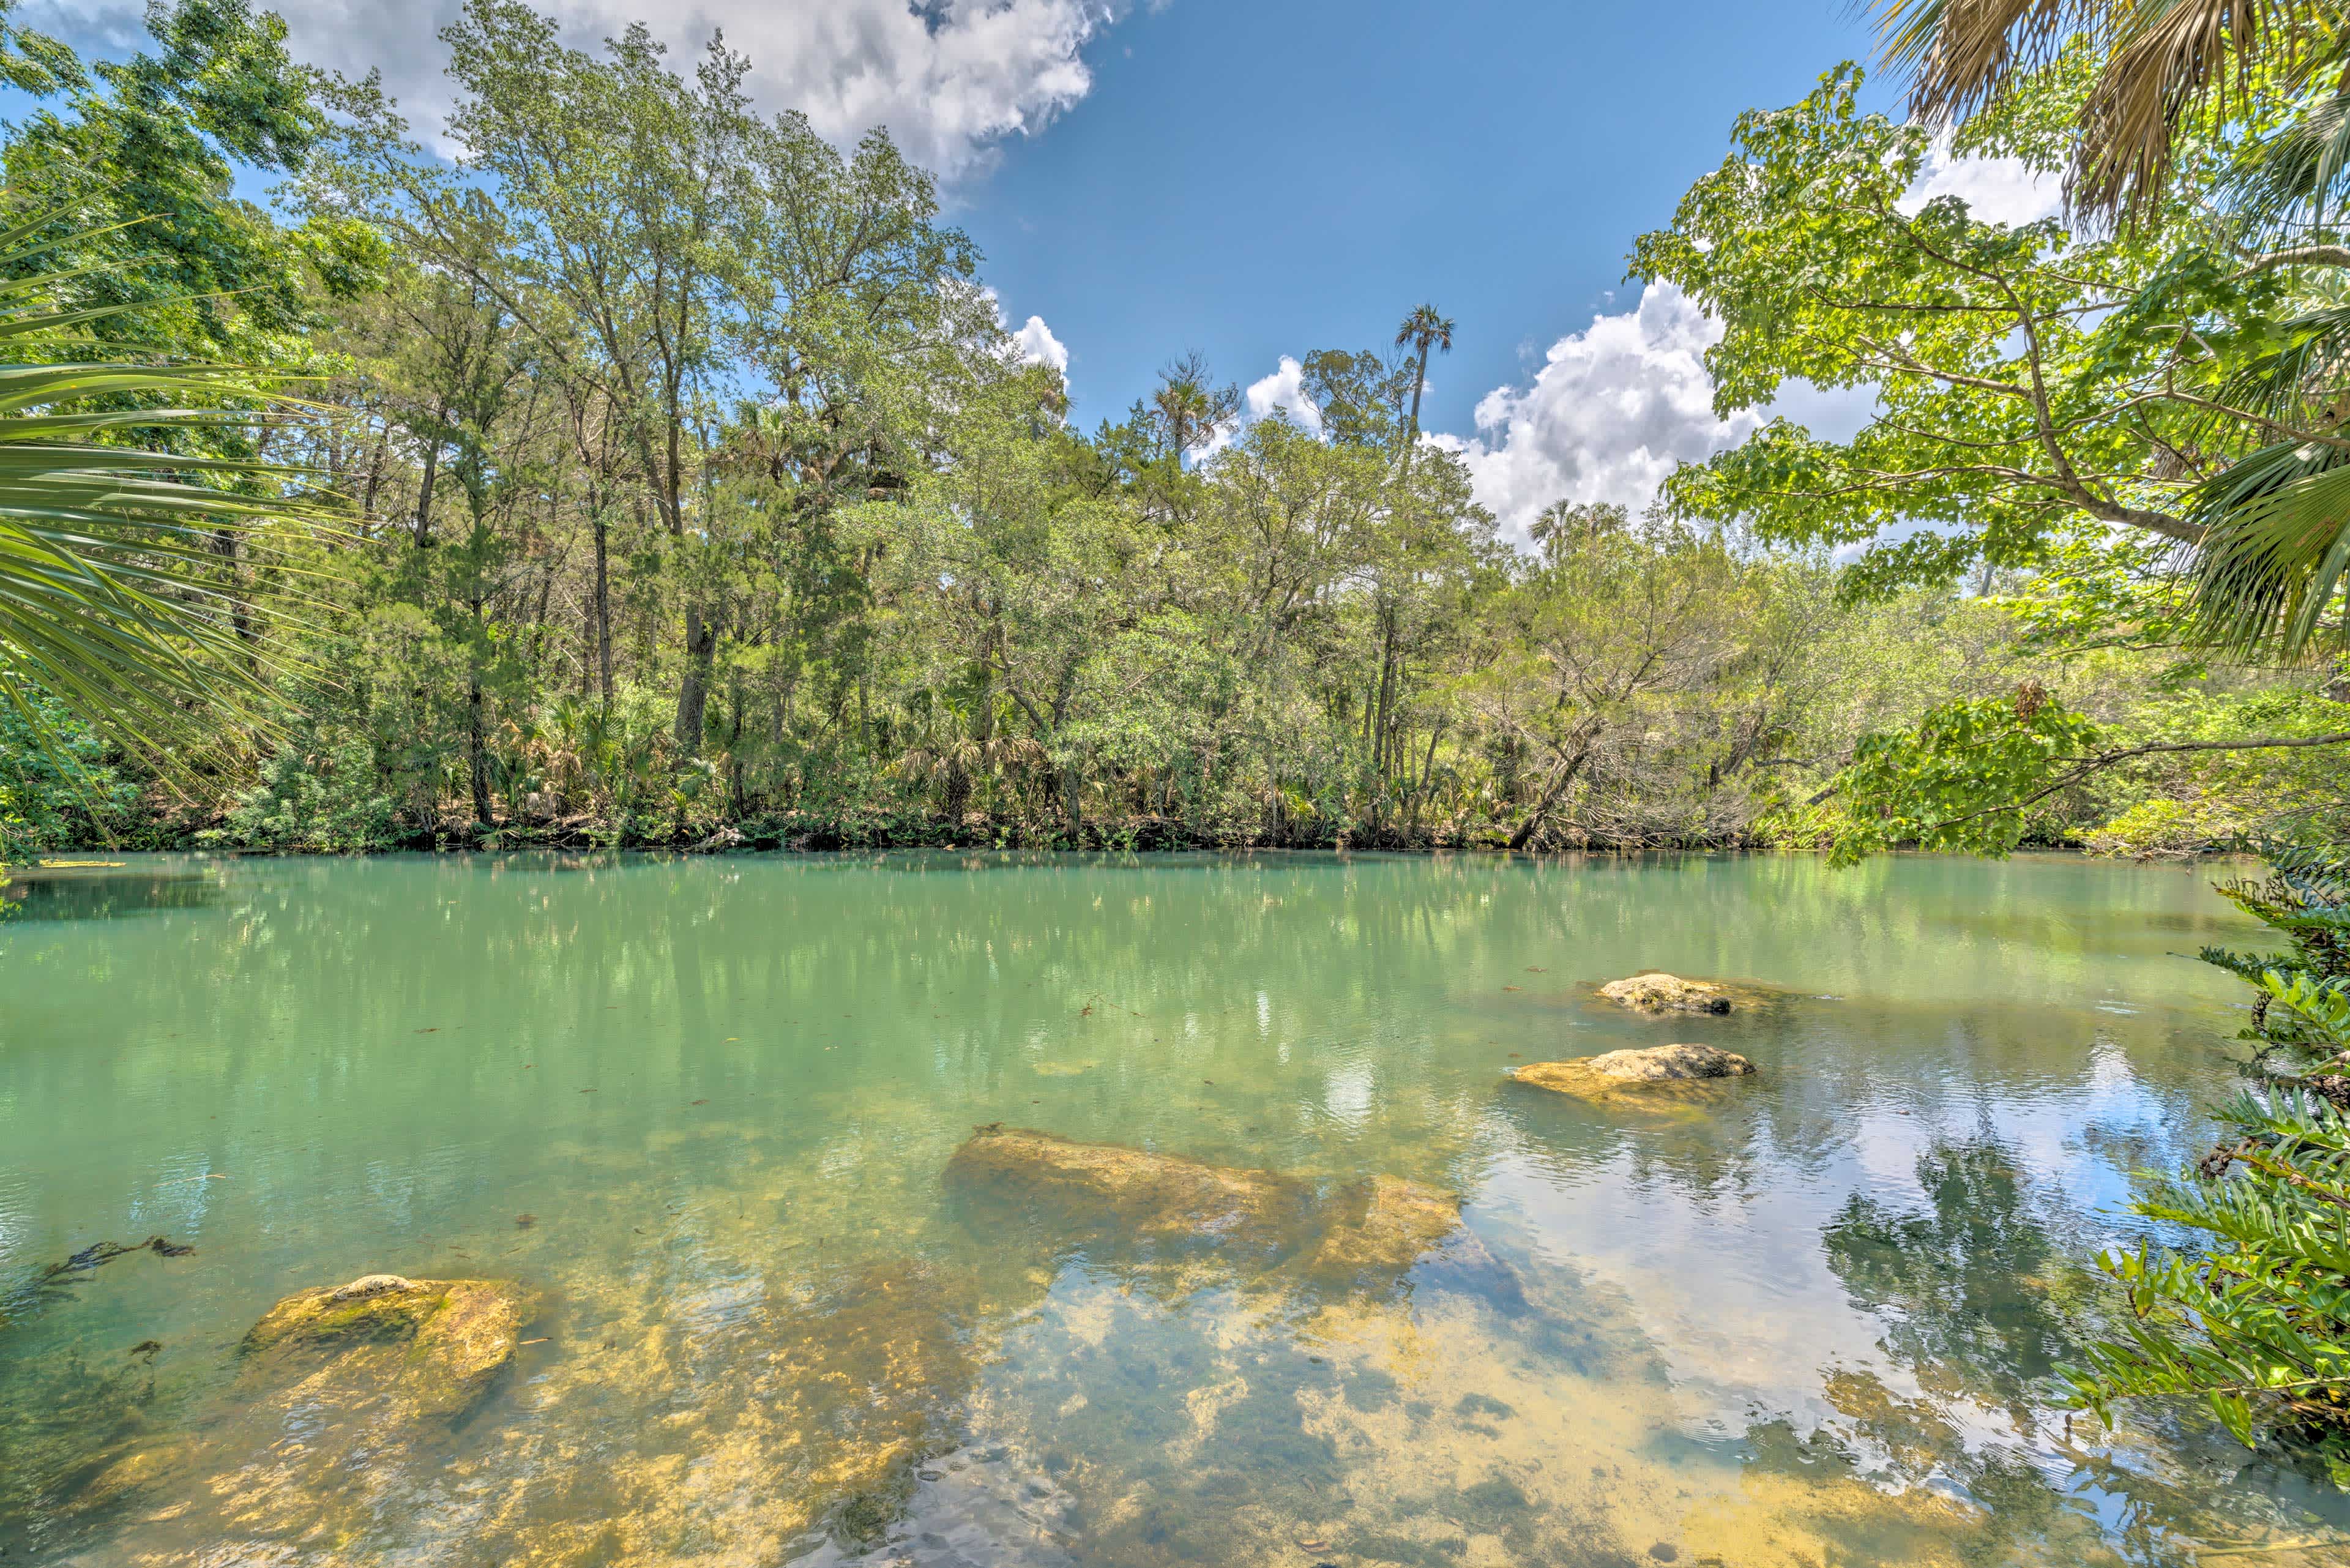 Landscape view of a marsh river surrounded by tall green forestry in Spring Hill, FL